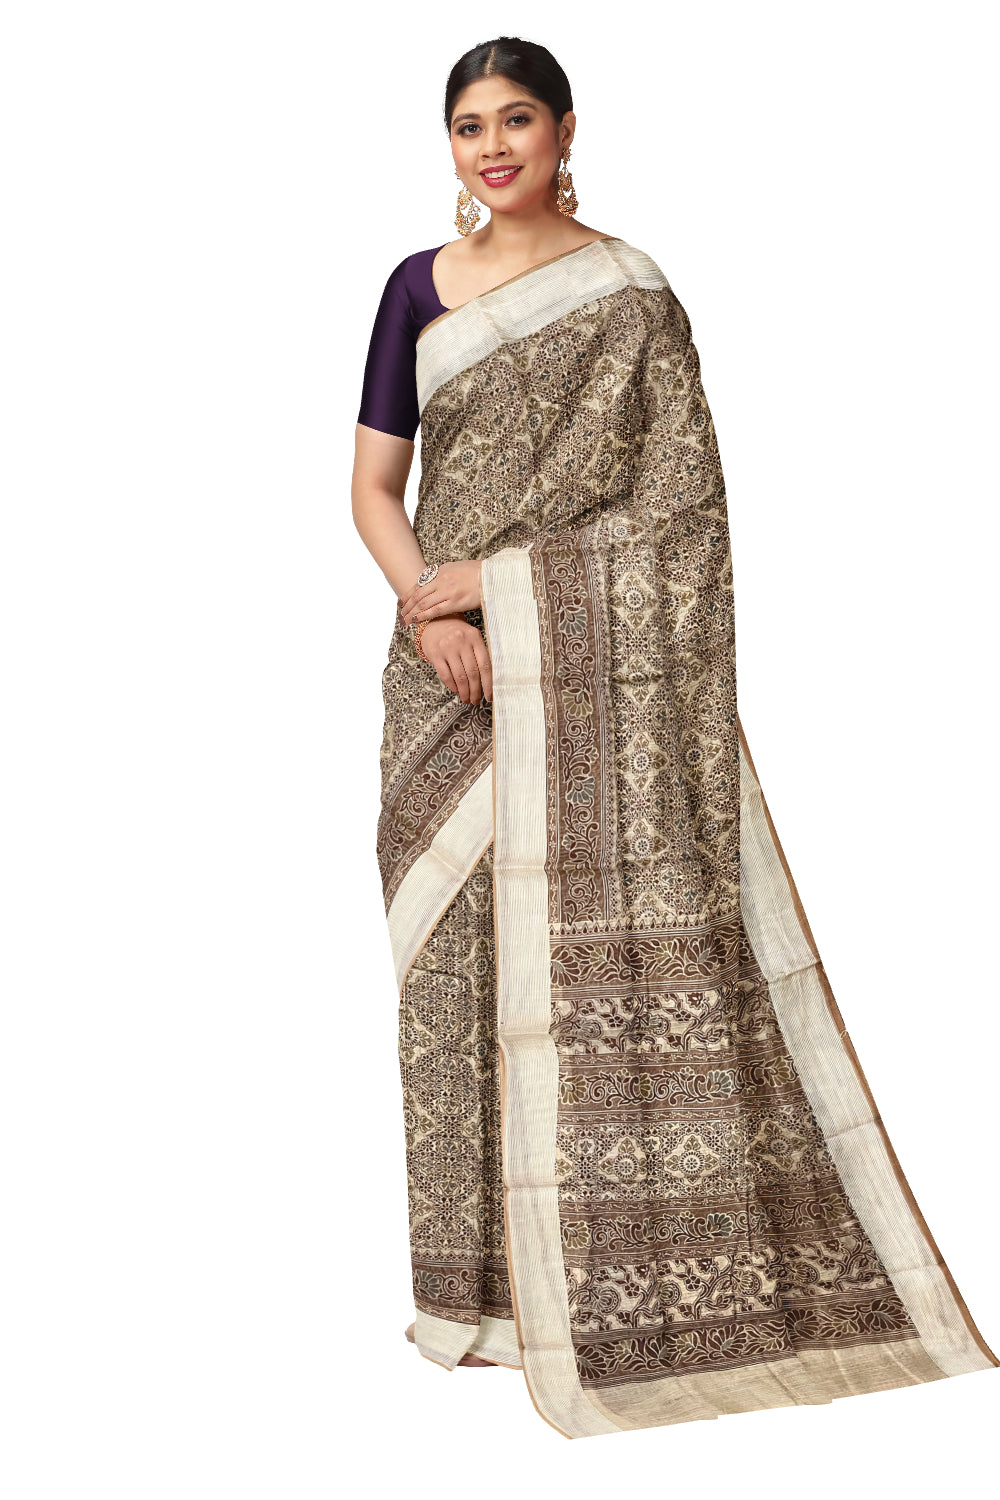 Southloom Cotton Saree with Brown Floral Woven Patterns